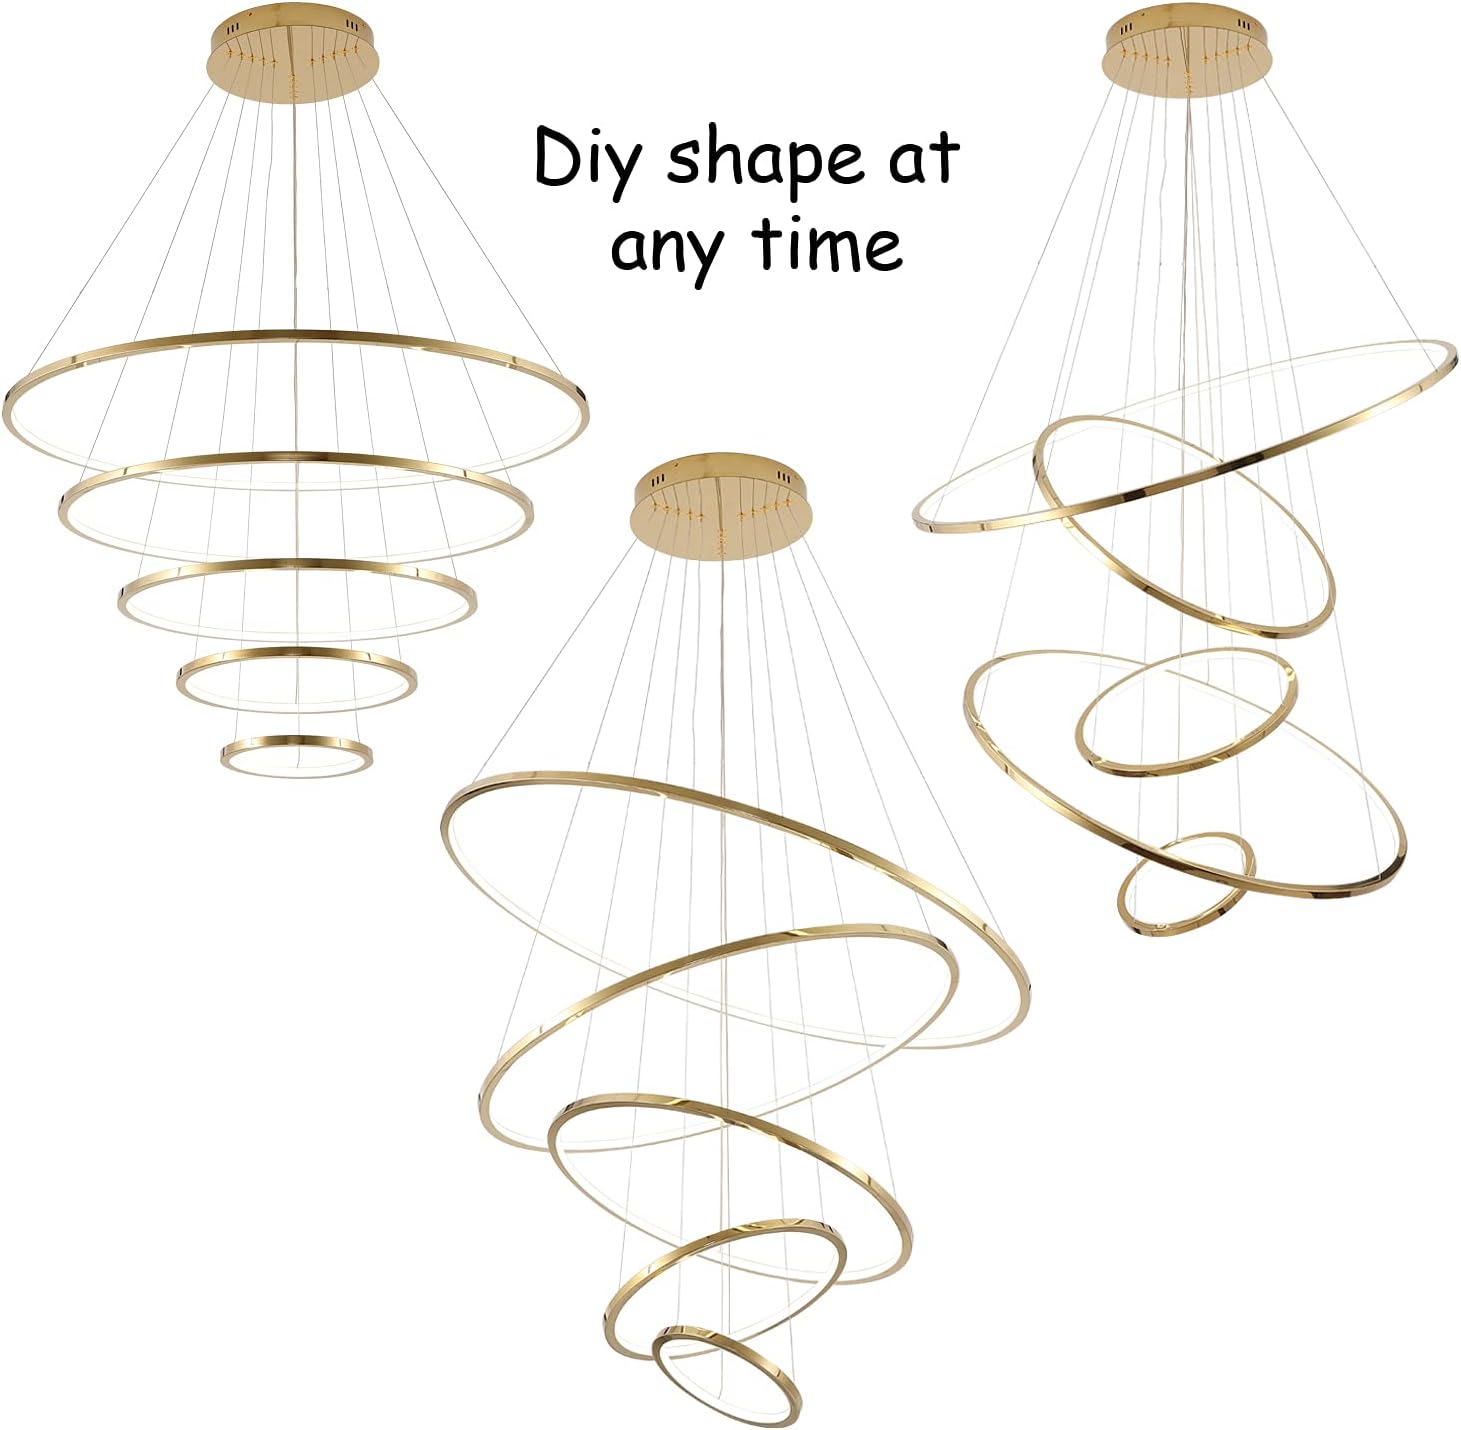 Akeelighting Modern 5 Ring High Ceiling Chandeliers for Foyer Dimmable Light Fixture - $500